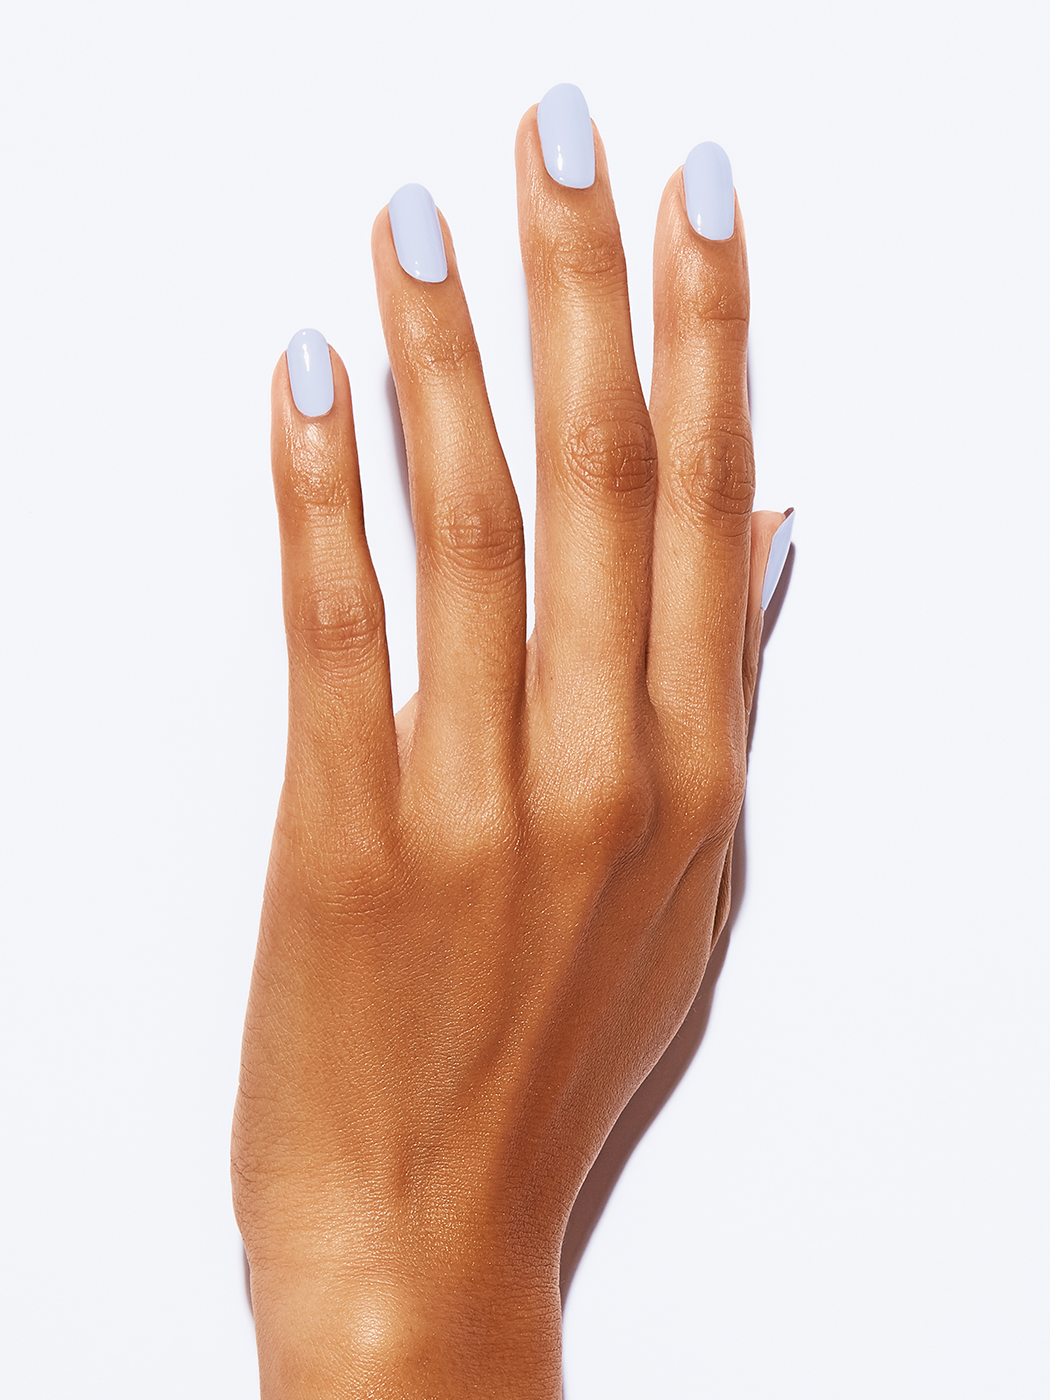 introducing essie treat love and color metallics: 8 new nail polish shades  with collagen & camellia extrac… | Essie treat love color, Nail polish,  Essie nail polish